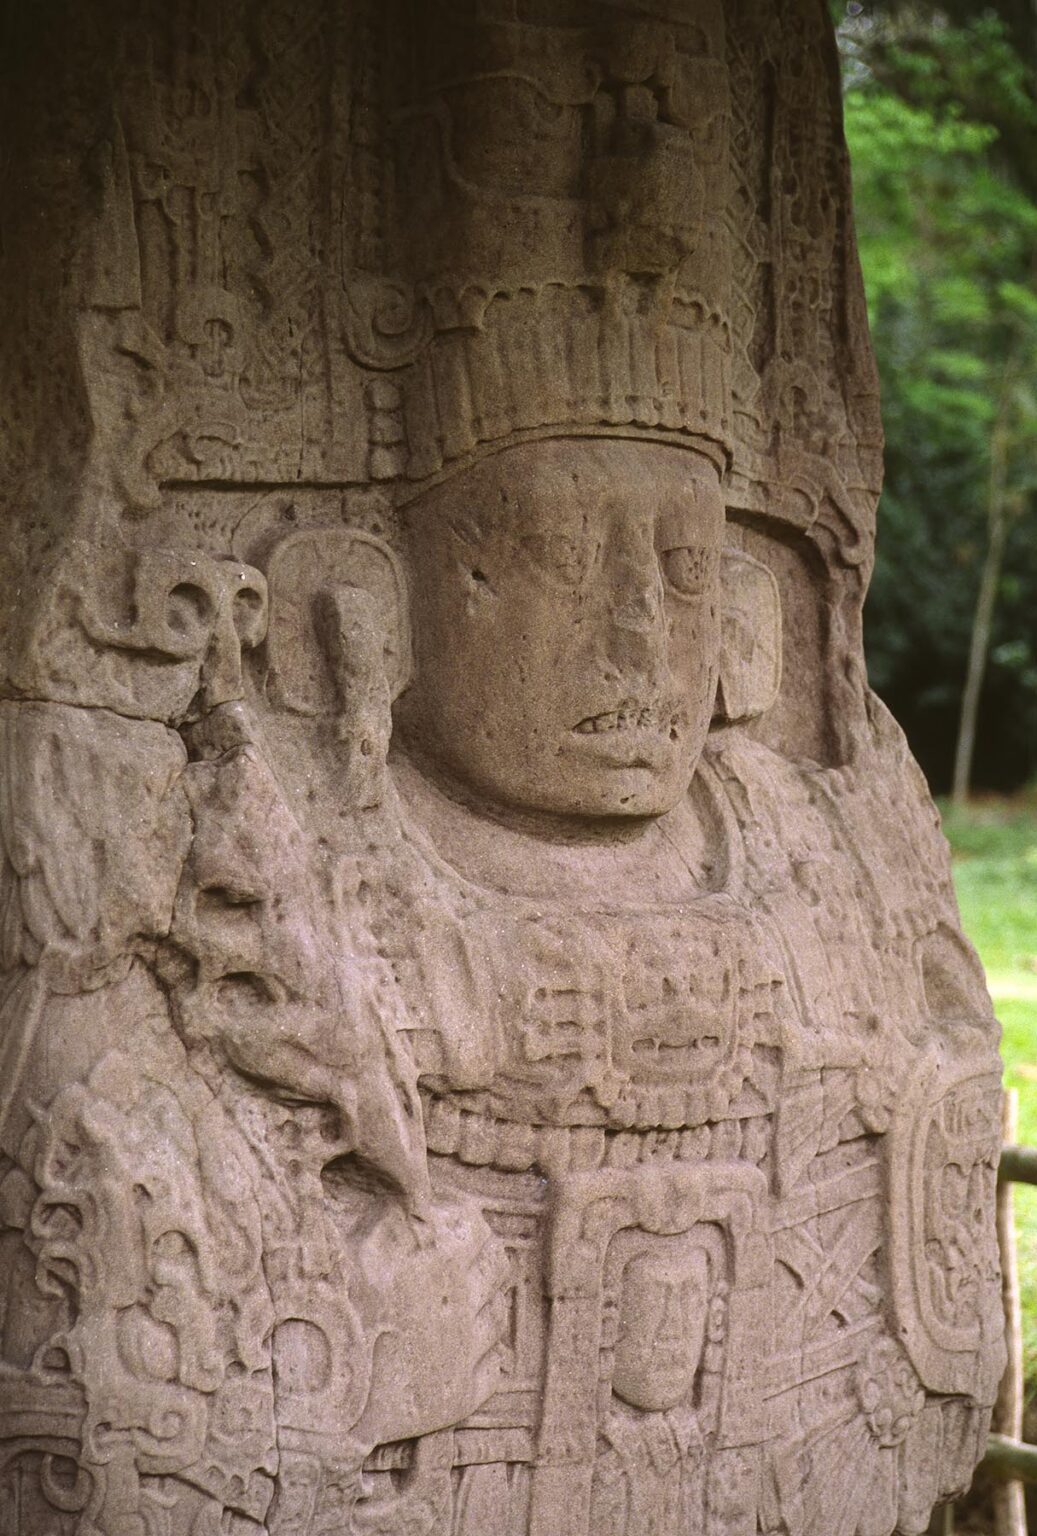 STELA K, dated to 805 AD, depicts the MAYAN ruler CAUAC SKY, who liberated Quirigua from Copan - QUIRIGUA RUINS, GAUTEMALA